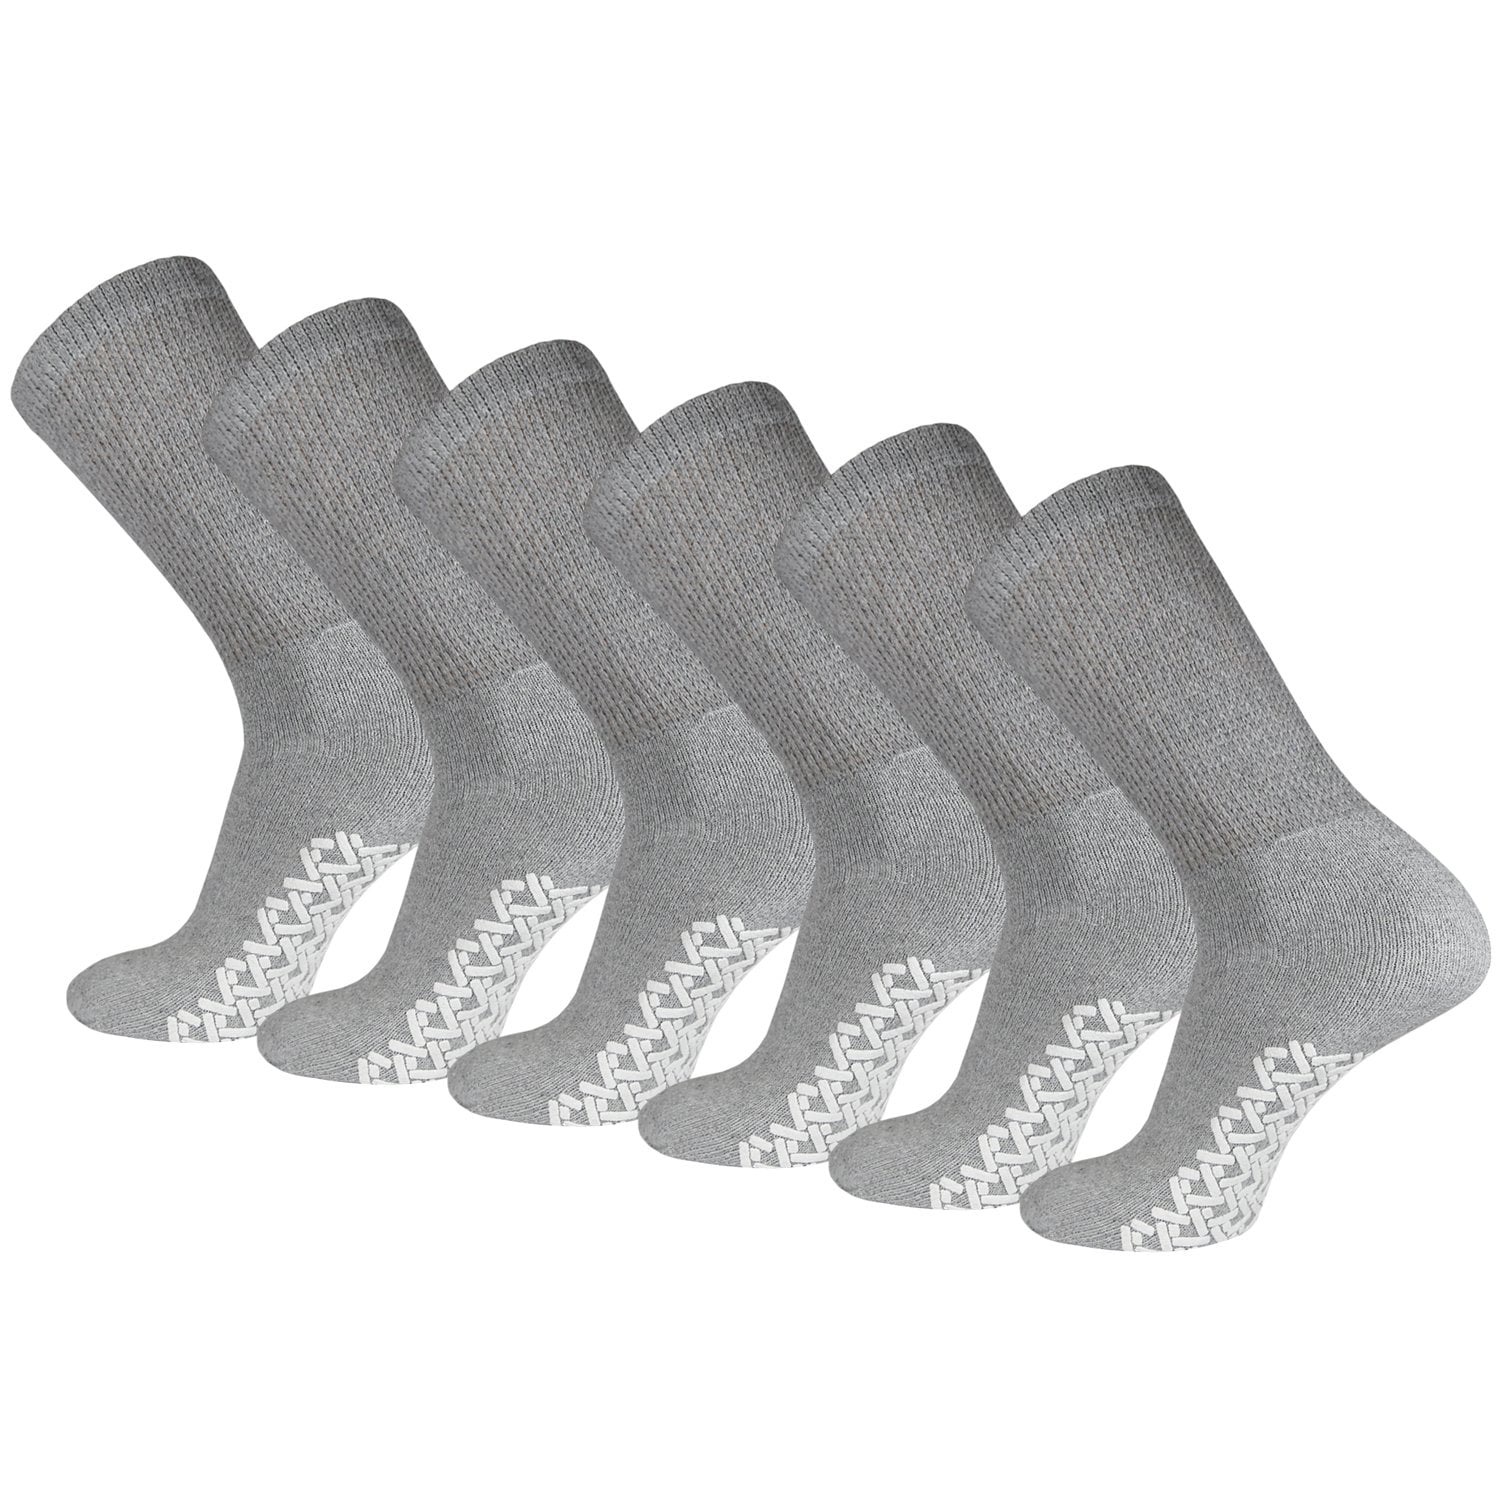 6 Pairs of Non-Skid Diabetic Cotton Crew Socks with Non Binding Top ...